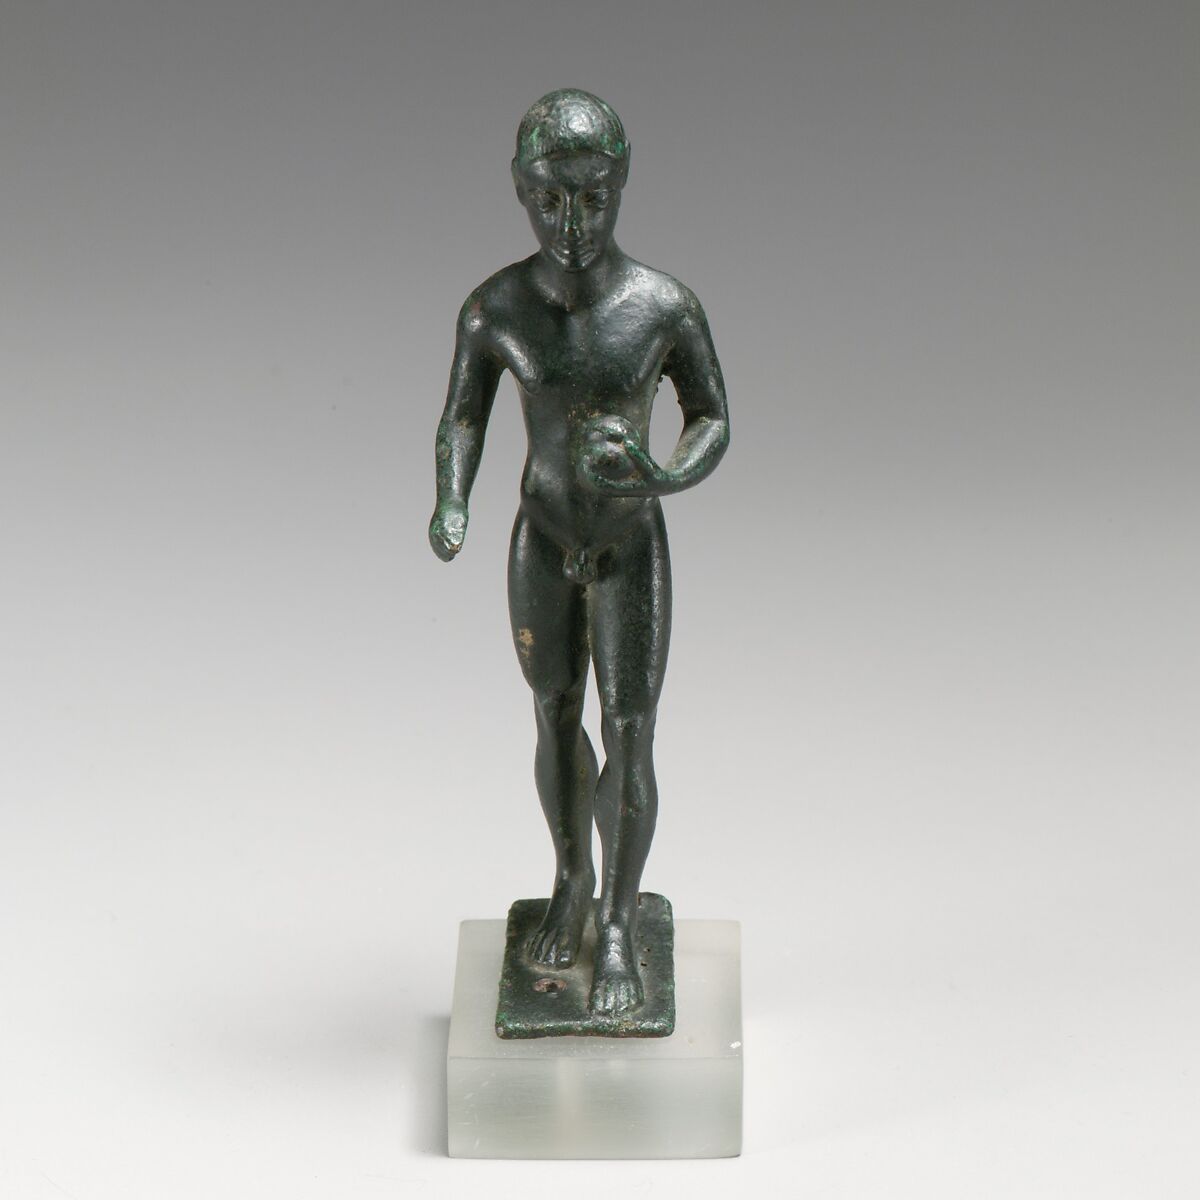 Statuette of a youth, Bronze, Greek 